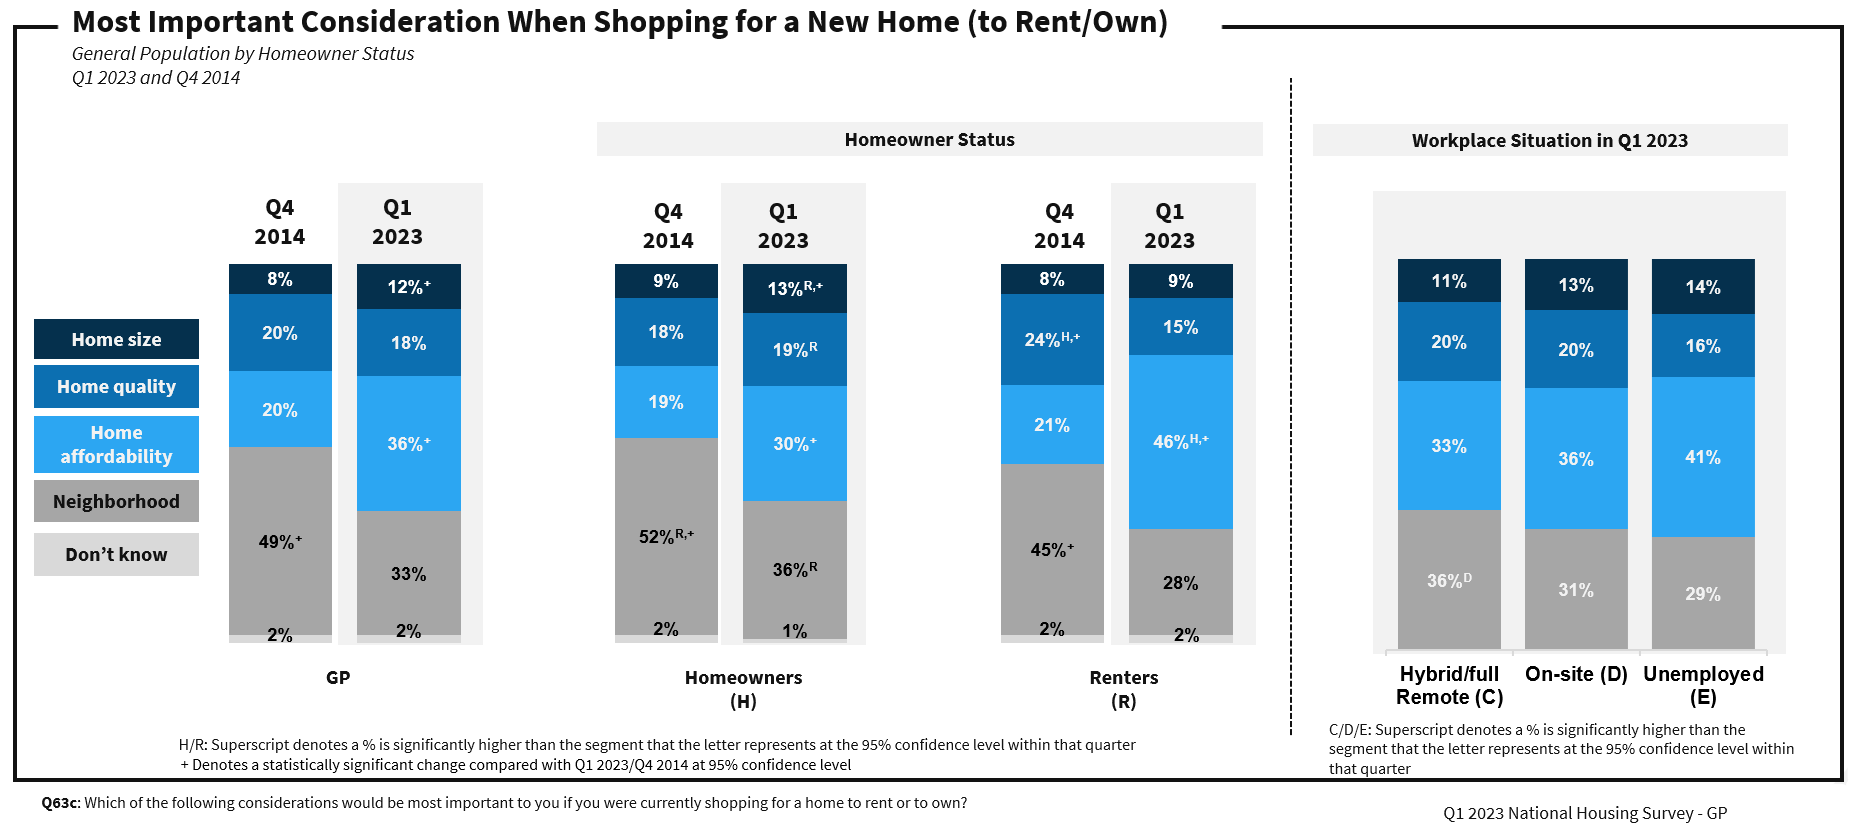 Most important consideration when shopping for a new home (to rent/own)